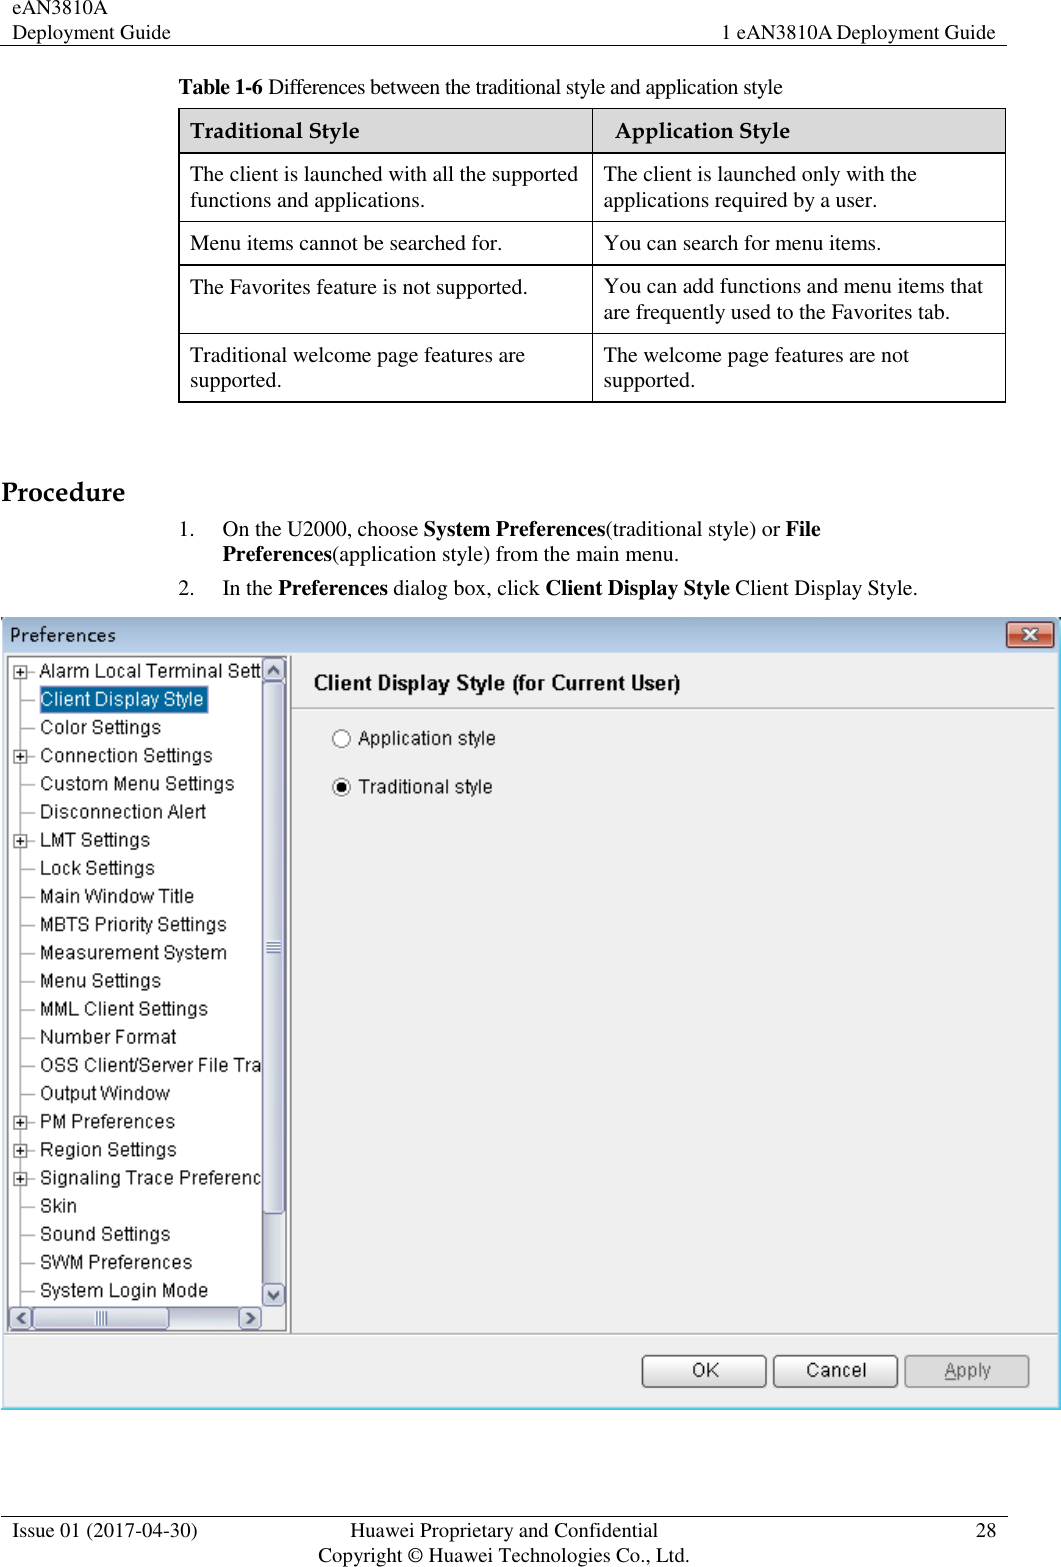 eAN3810A Deployment Guide 1 eAN3810A Deployment Guide  Issue 01 (2017-04-30) Huawei Proprietary and Confidential                                     Copyright © Huawei Technologies Co., Ltd. 28  Table 1-6 Differences between the traditional style and application style Traditional Style   Application Style     The client is launched with all the supported functions and applications. The client is launched only with the applications required by a user. Menu items cannot be searched for. You can search for menu items. The Favorites feature is not supported. You can add functions and menu items that are frequently used to the Favorites tab. Traditional welcome page features are supported. The welcome page features are not supported.          Procedure 1. On the U2000, choose System Preferences(traditional style) or File Preferences(application style) from the main menu. 2. In the Preferences dialog box, click Client Display Style Client Display Style.   